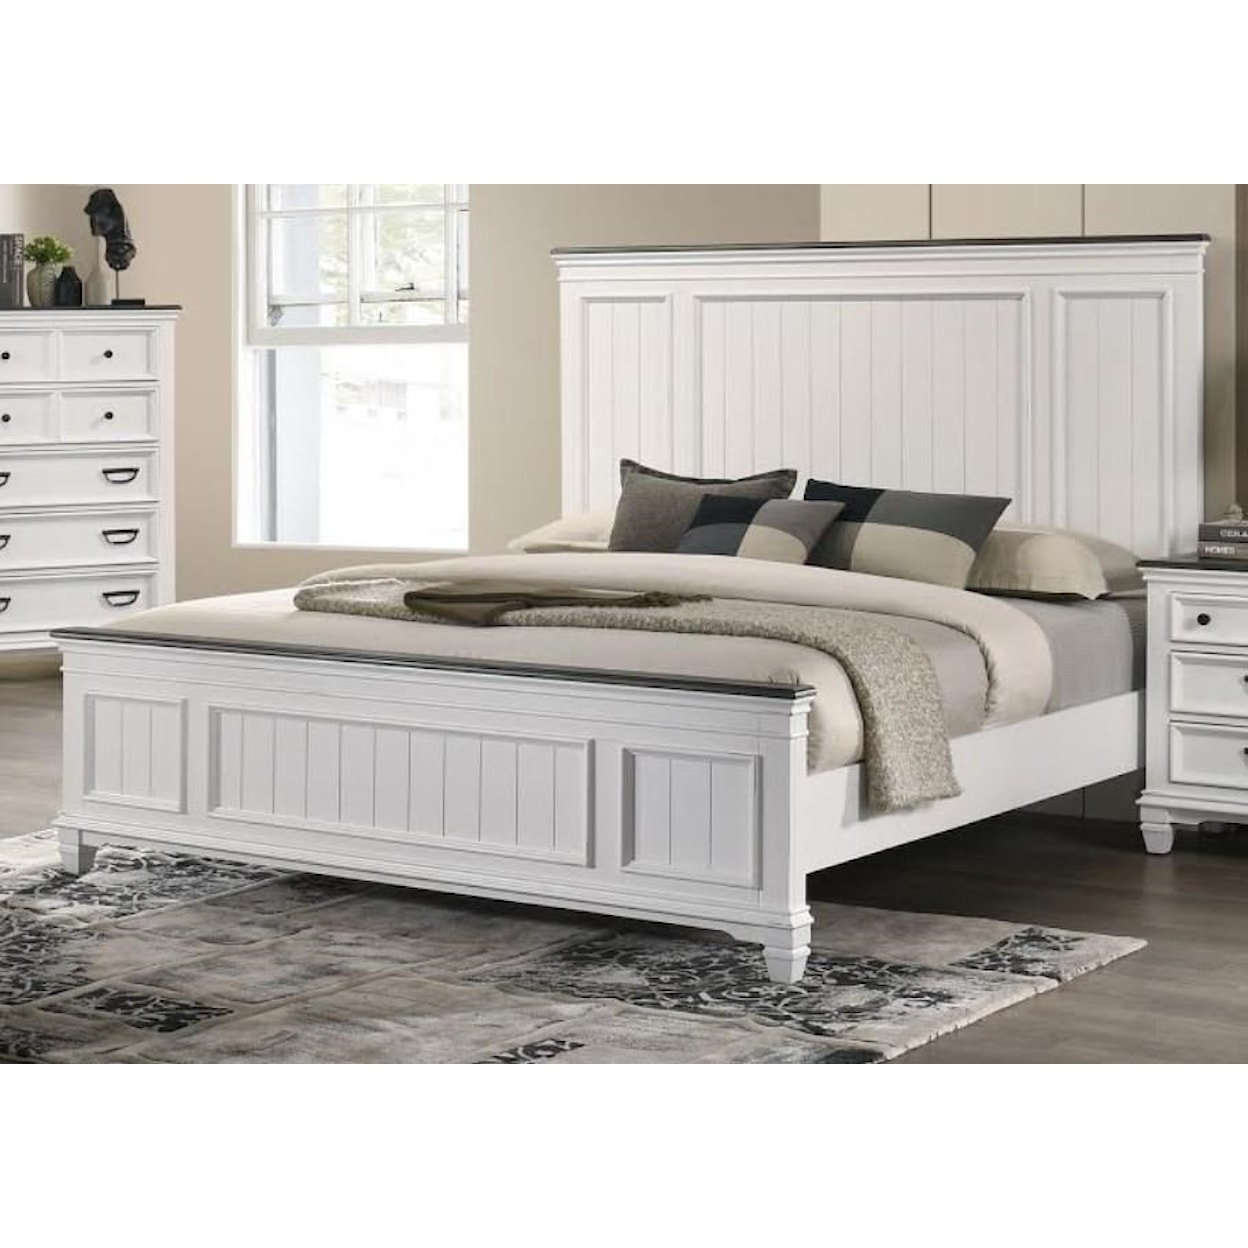 Lifestyle Allyson Full Bed